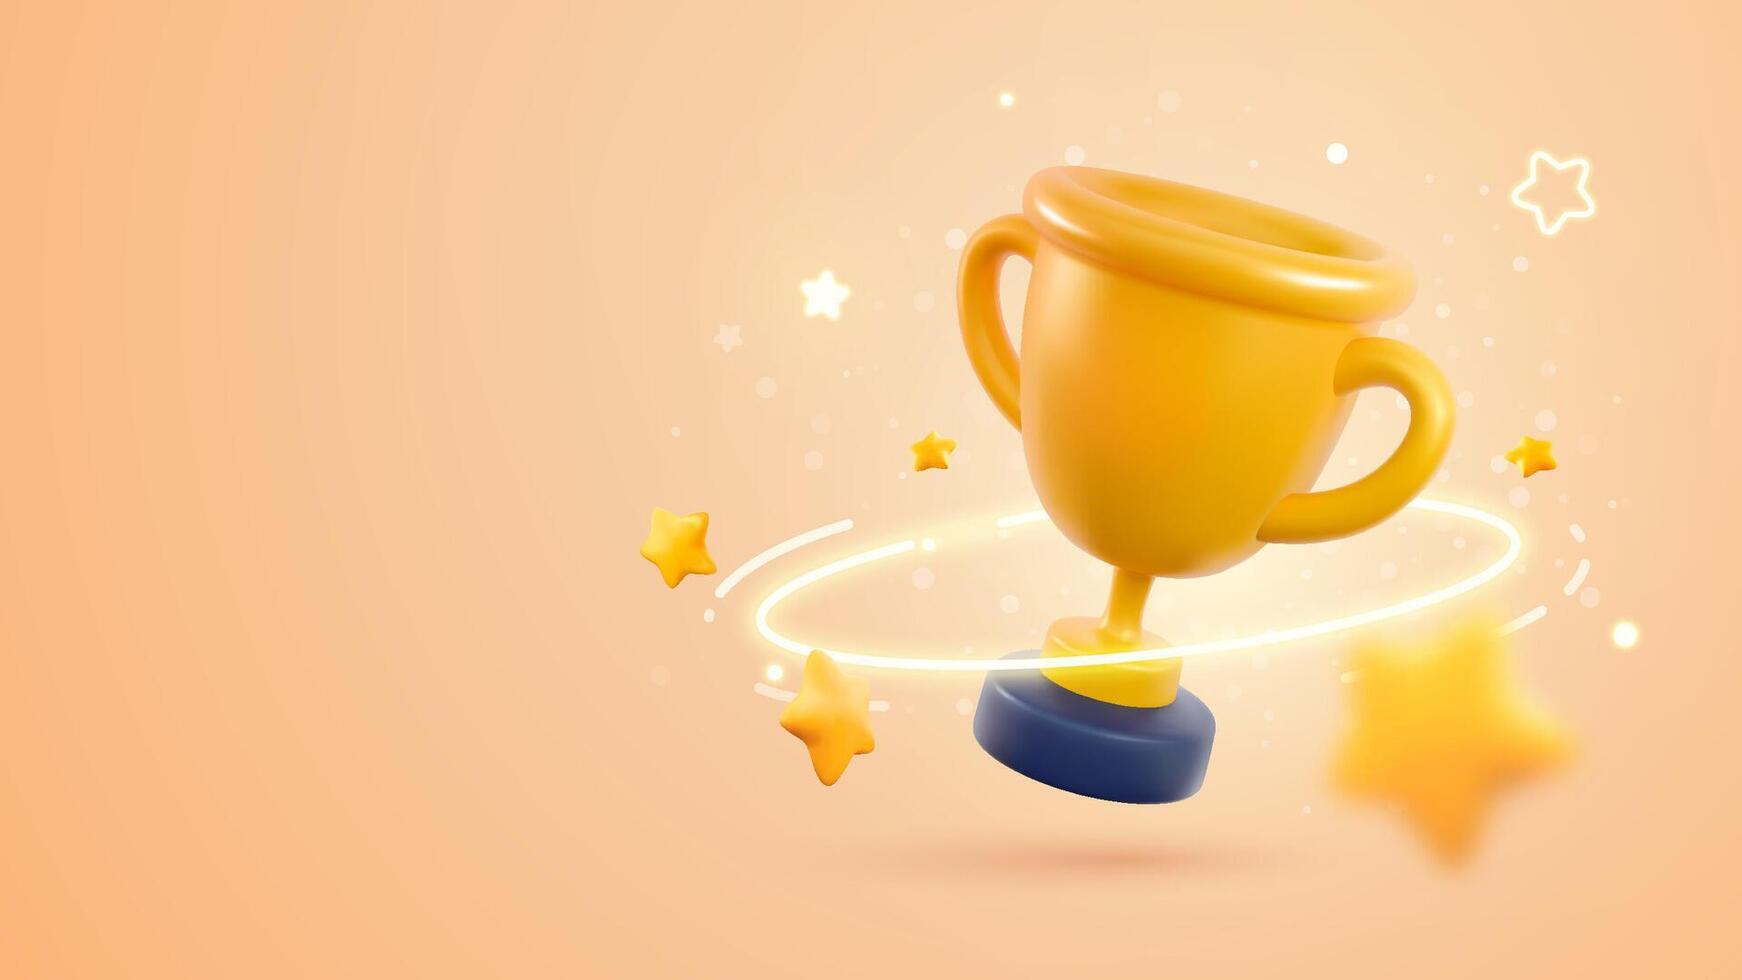 Champion cup 3d vector illustration. Win prize, first place sport competition. Cartoon trophy cup with flying stars on light background